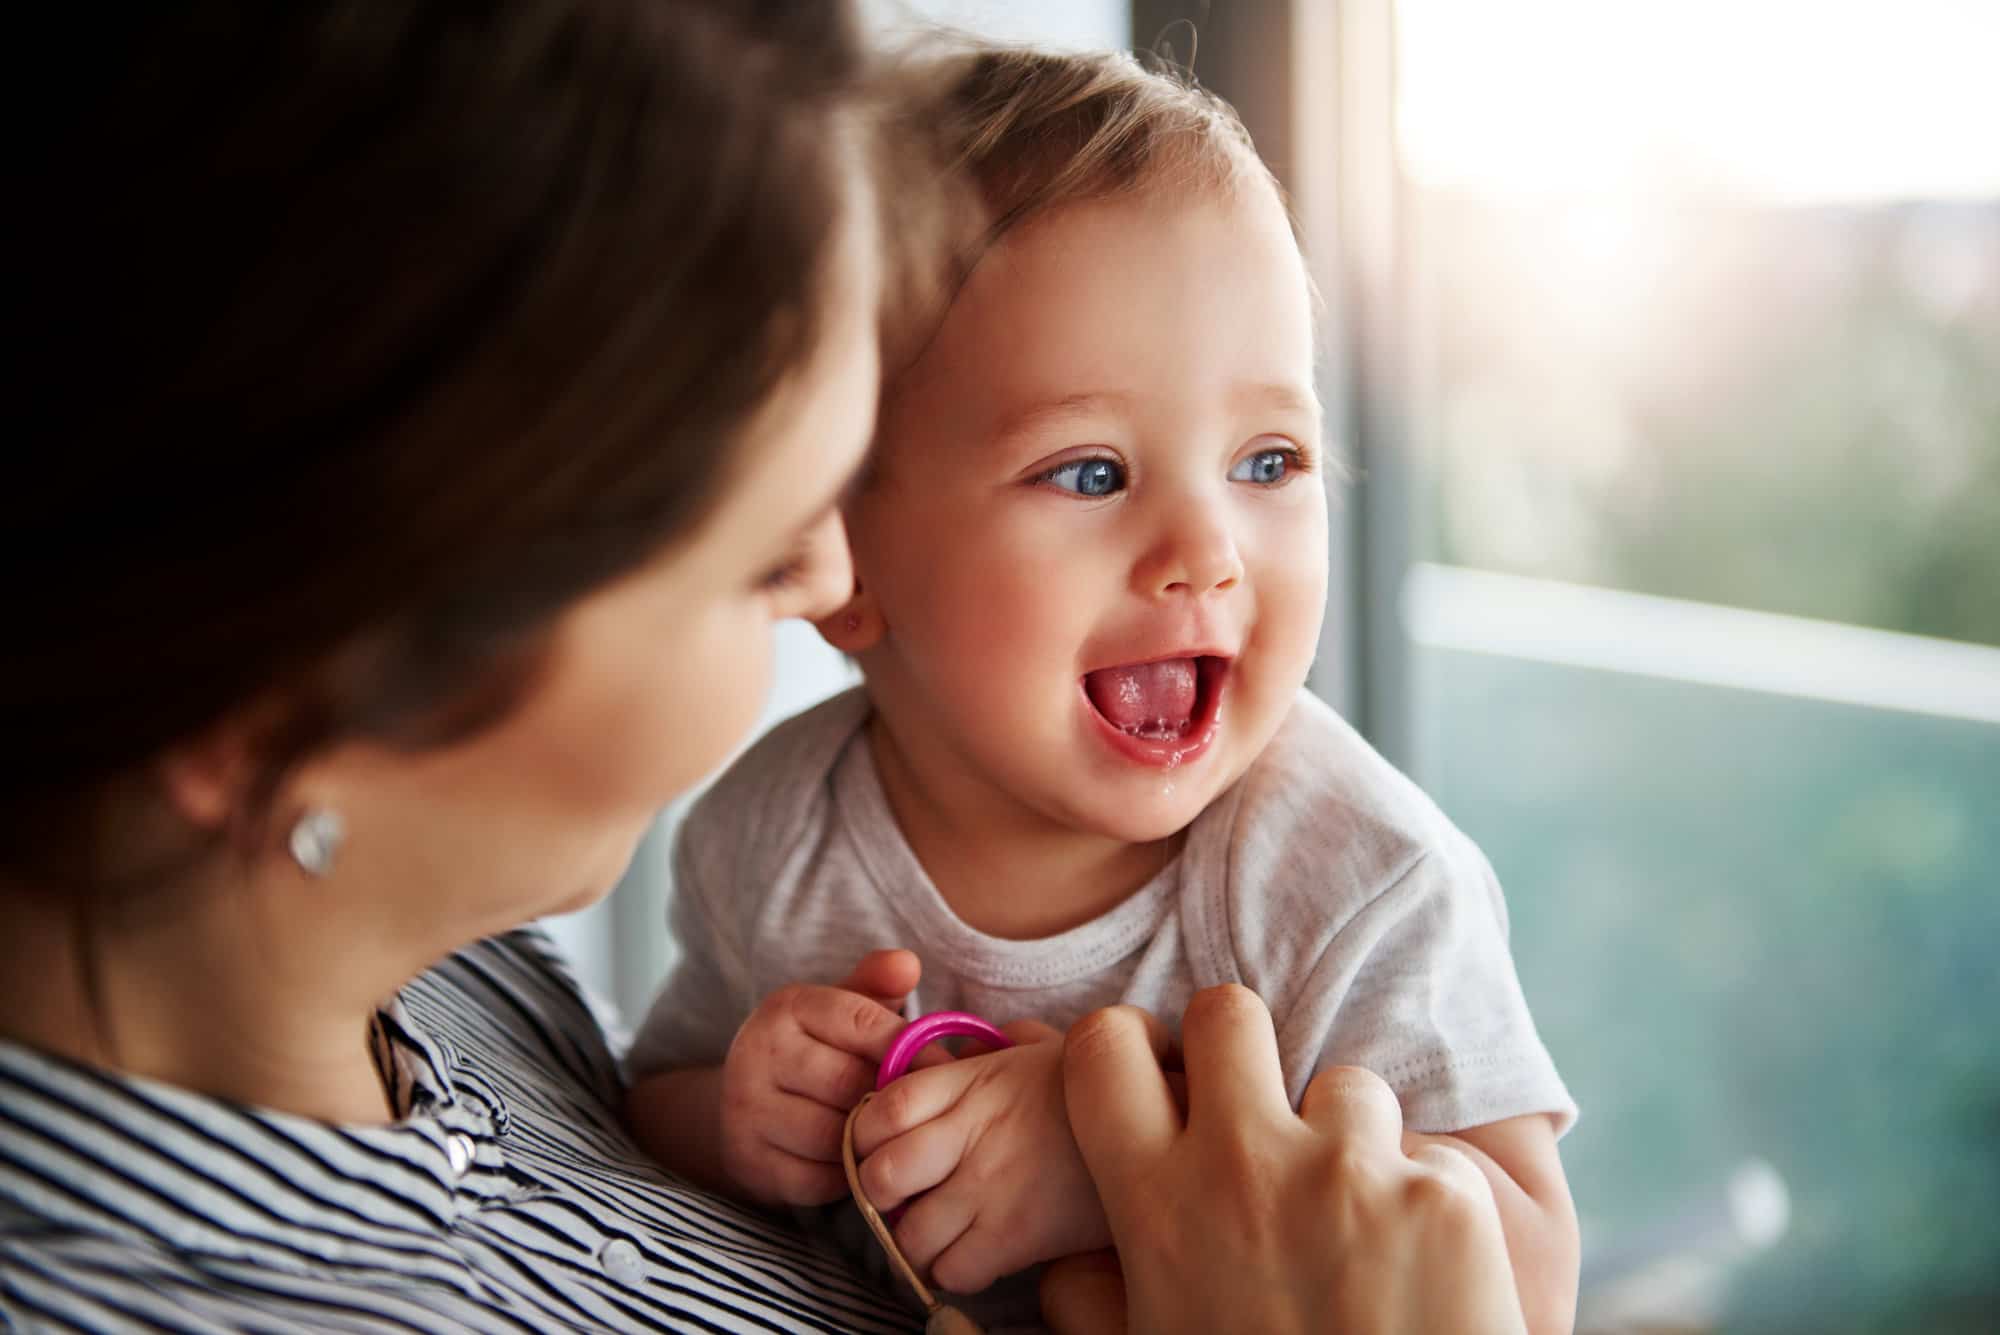 woman holding small baby with mouth open smiling near window